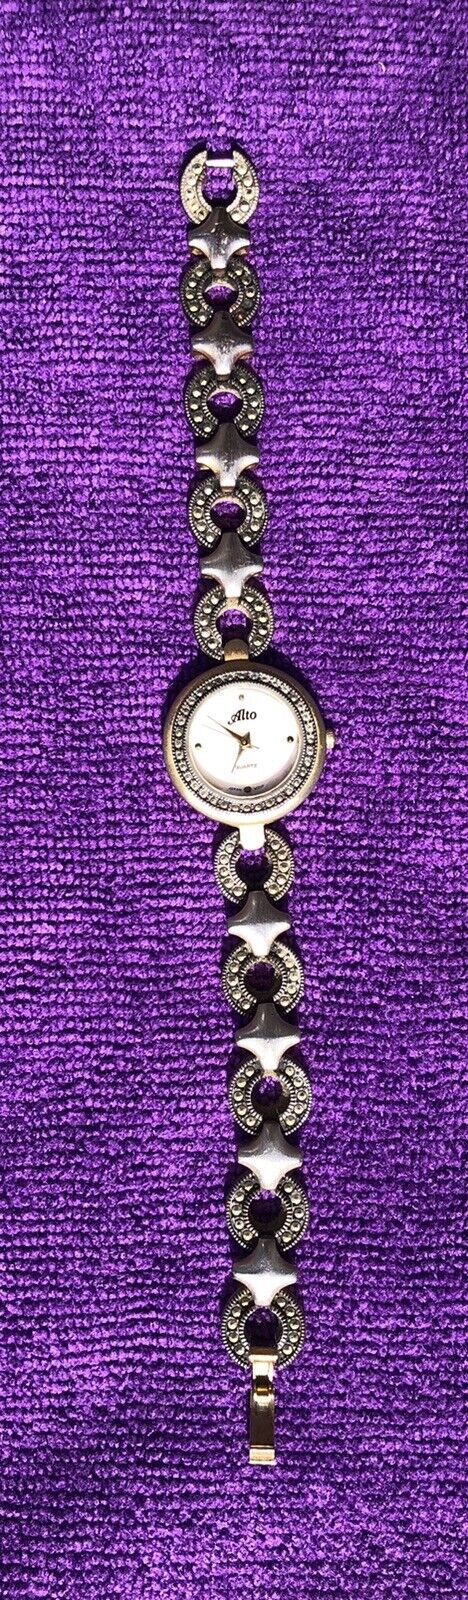 Vintage ALTO Quartz Marcasite and Mother of Pearl, Brushed Metal Watch